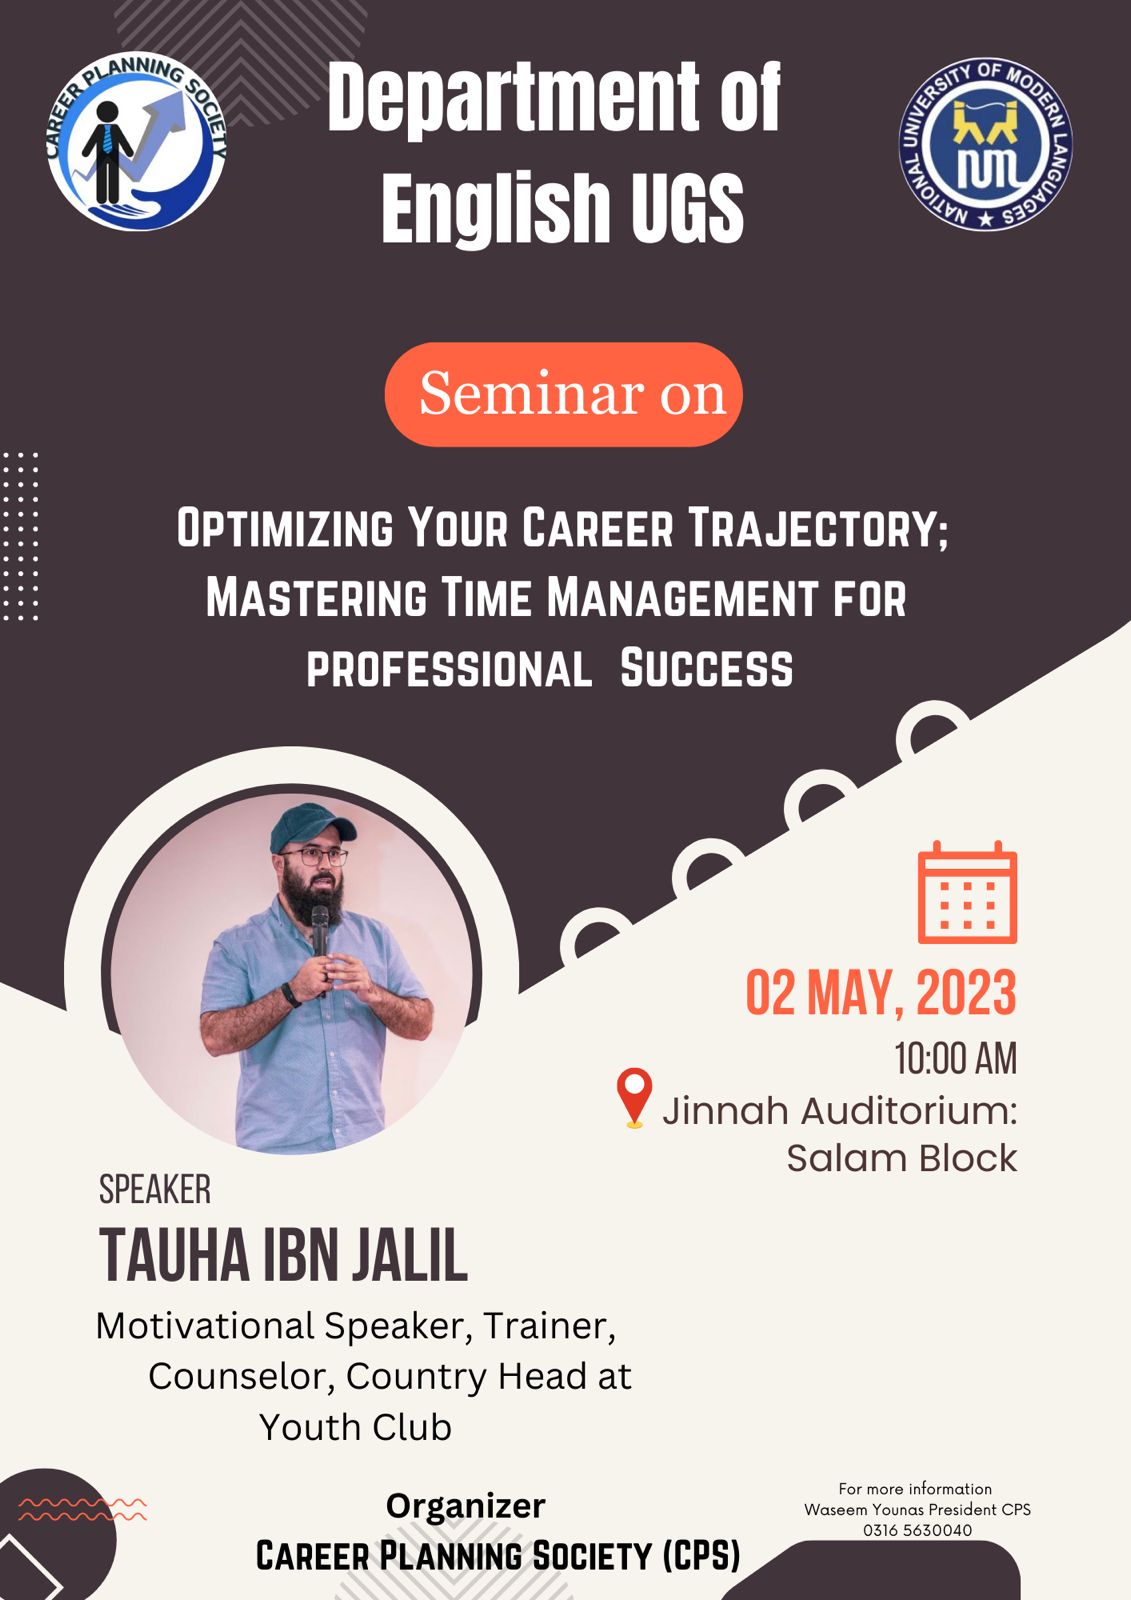 Seminar on "Optimizing your Career Trajectory; Mastering Time Management for Professional Success" by Career Planning Society (CPS)